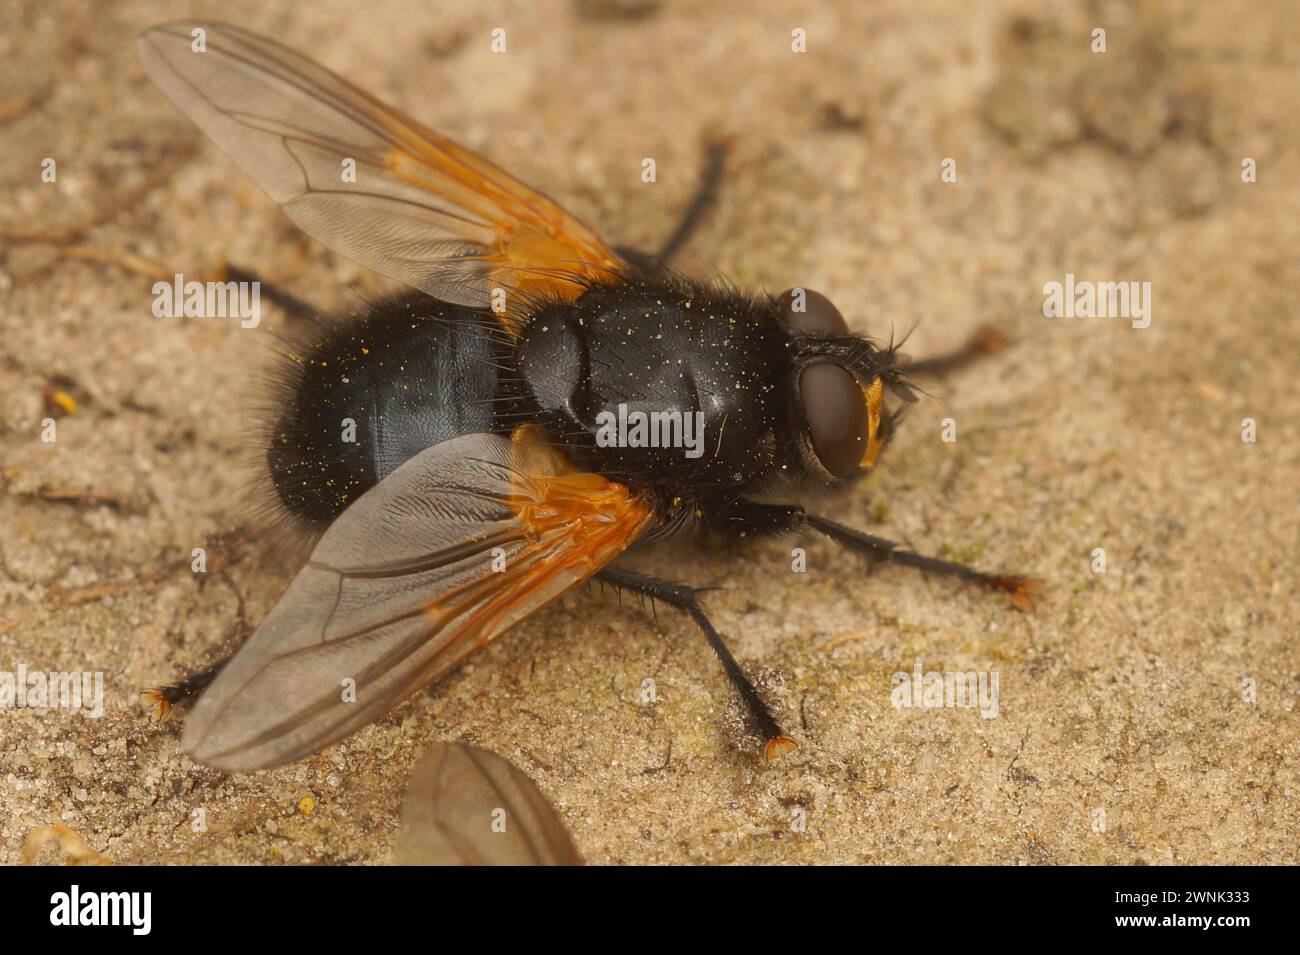 Closeup on a noon or noonday fly, Mesembrina meridiana sitting on the ground Stock Photo